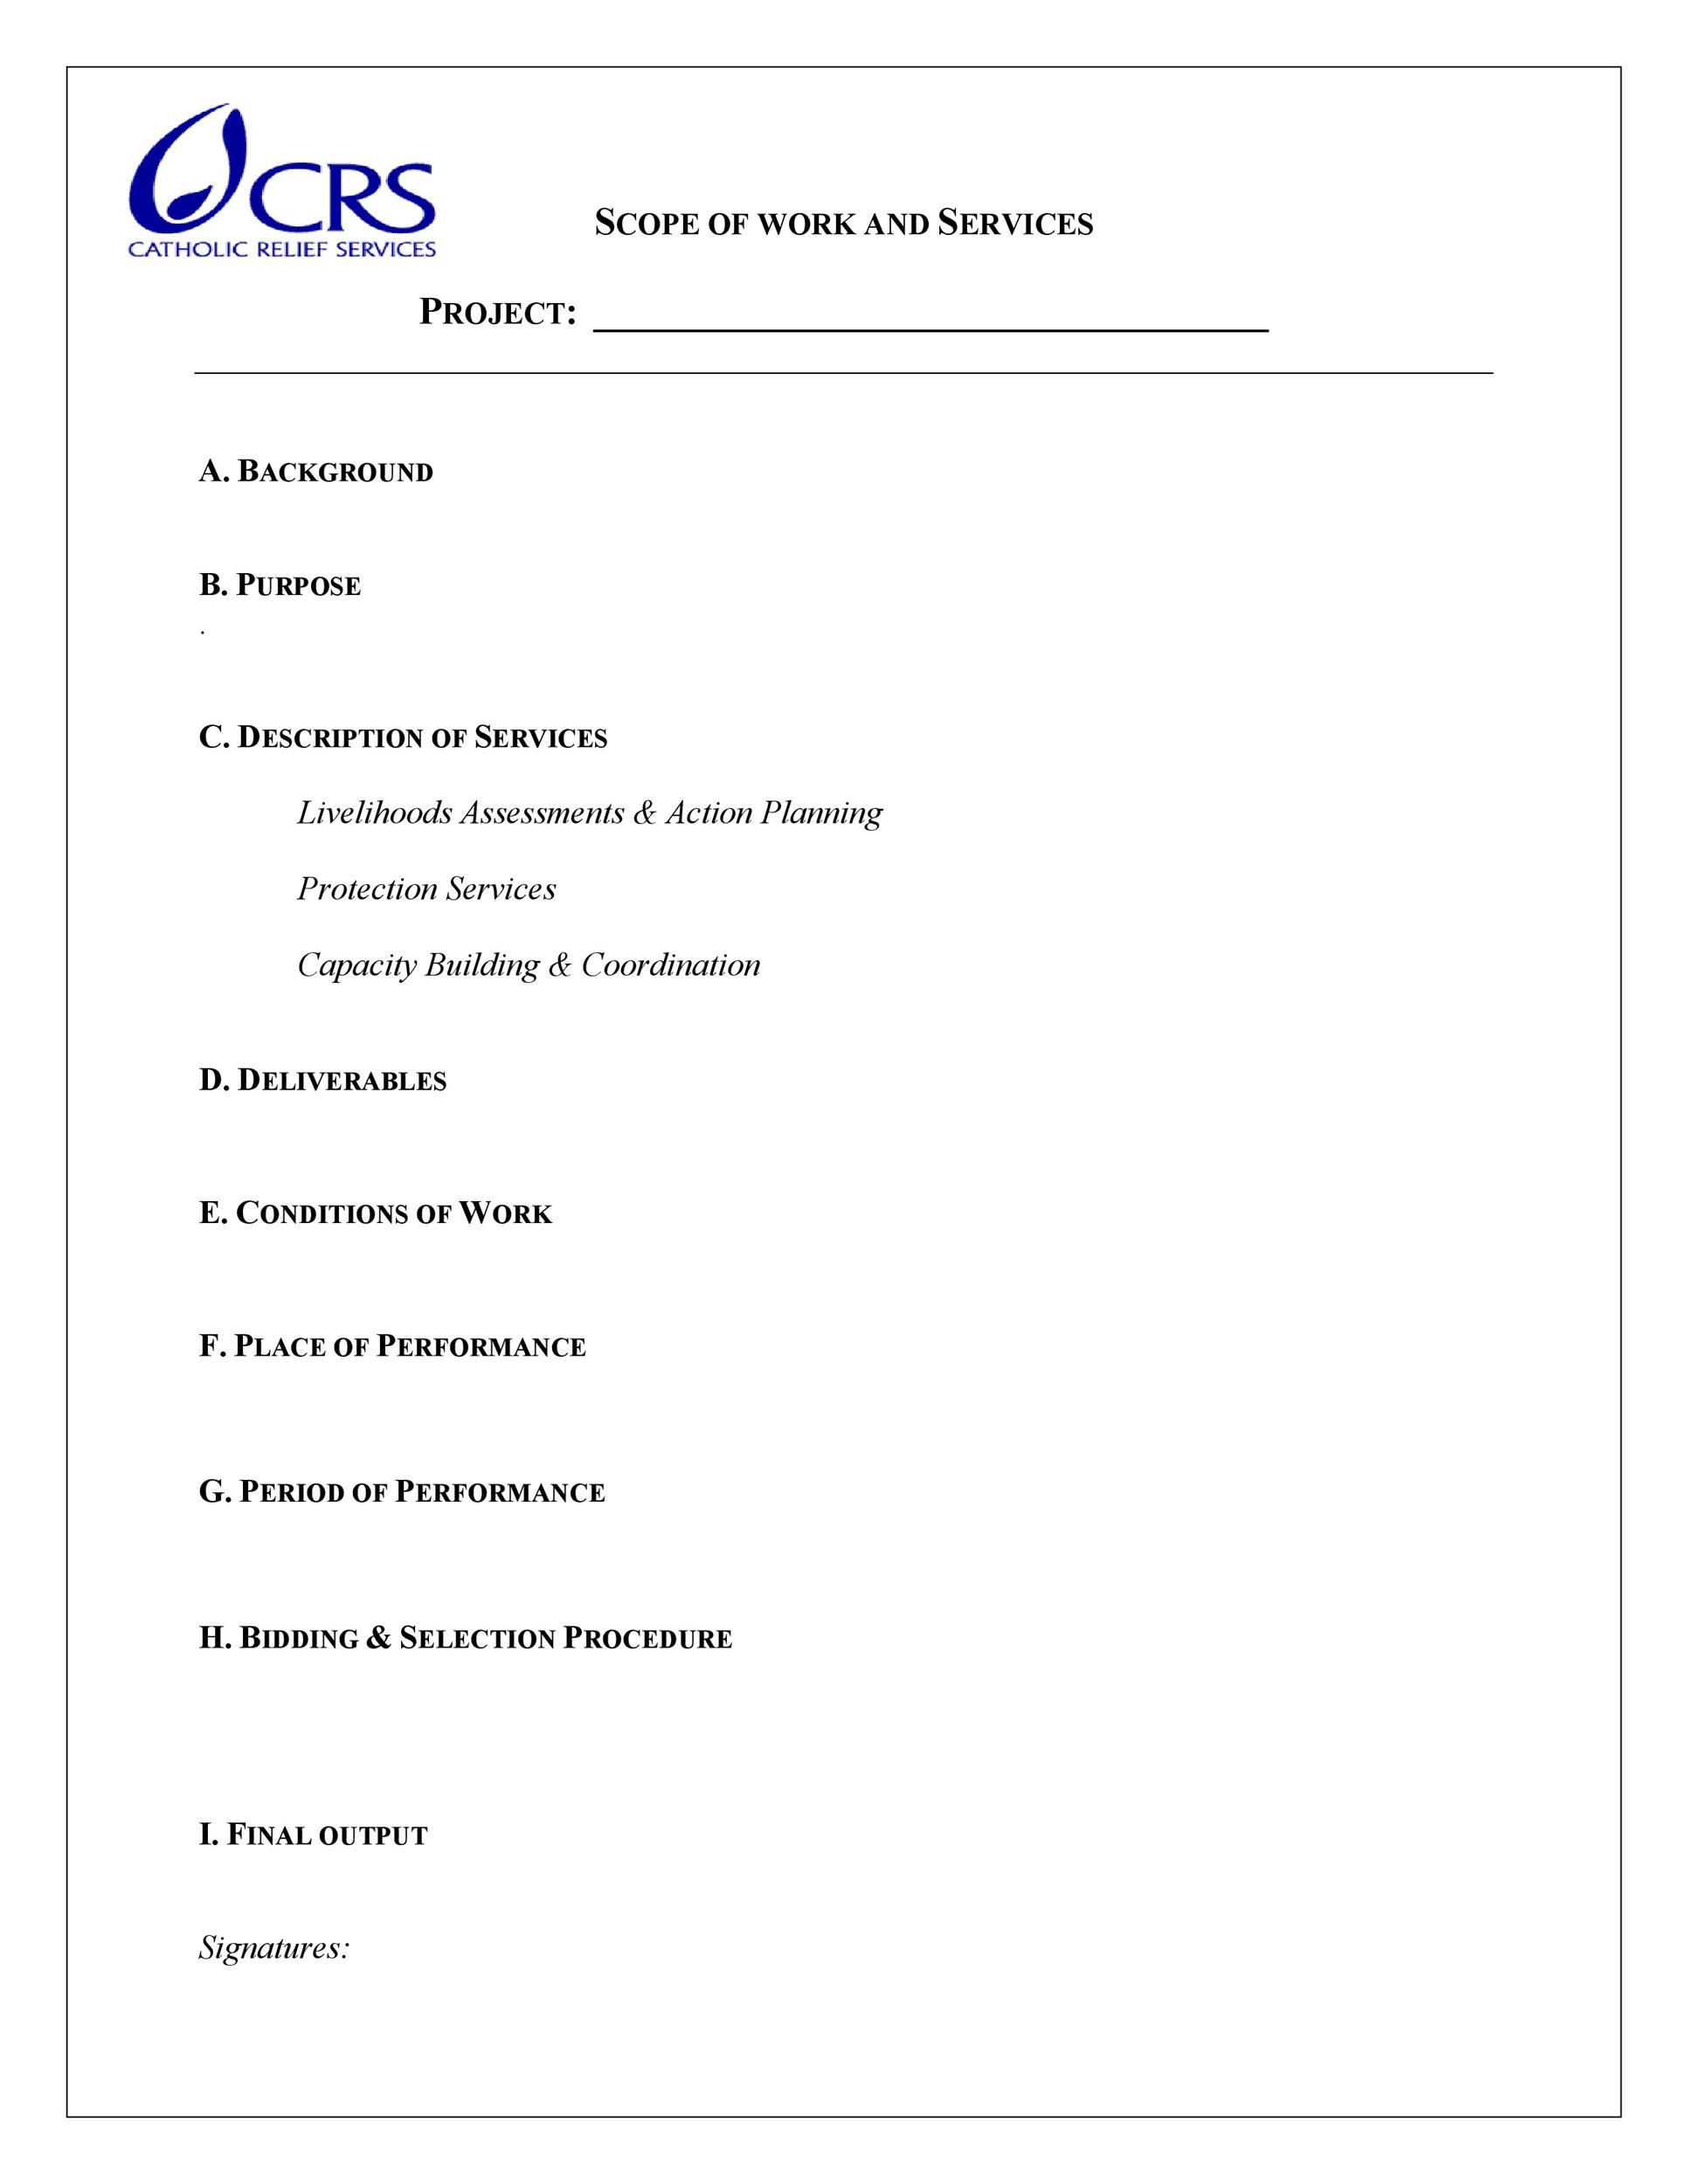 Professional Services Scope Of Work Template